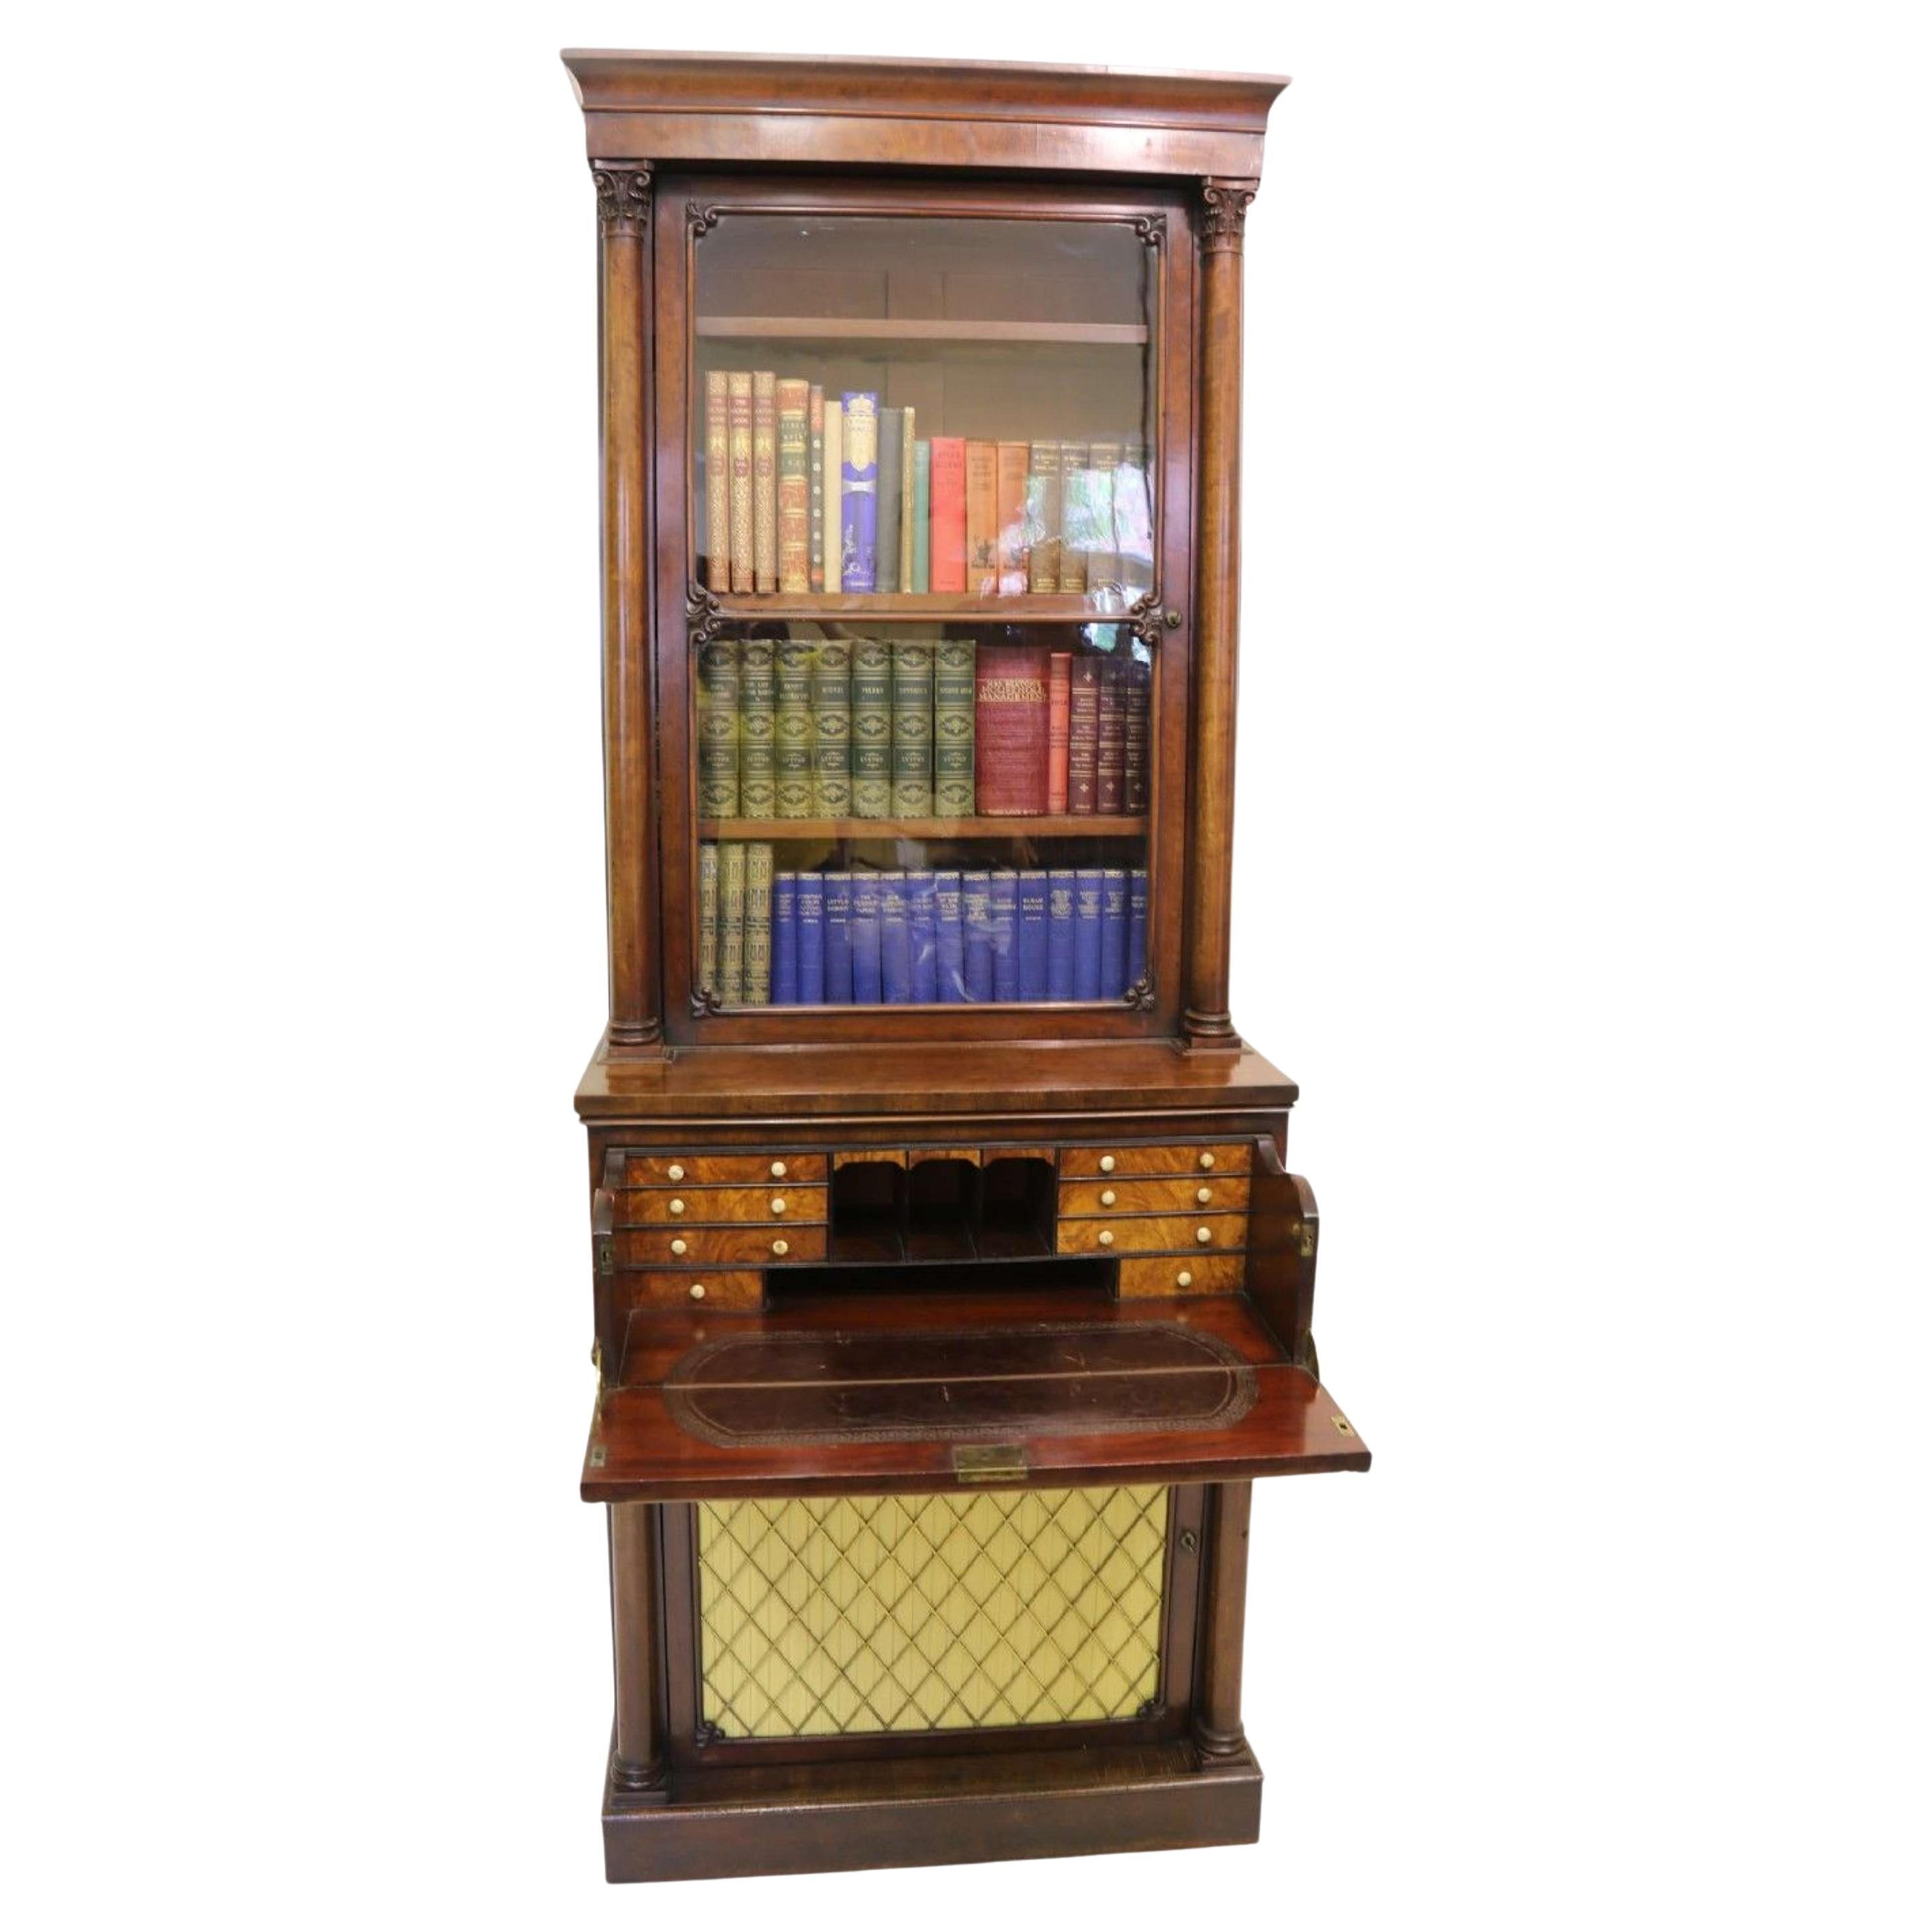 A rare small Regency Mahogany secretaire bookcase by Gillows of Lancaster c 1830